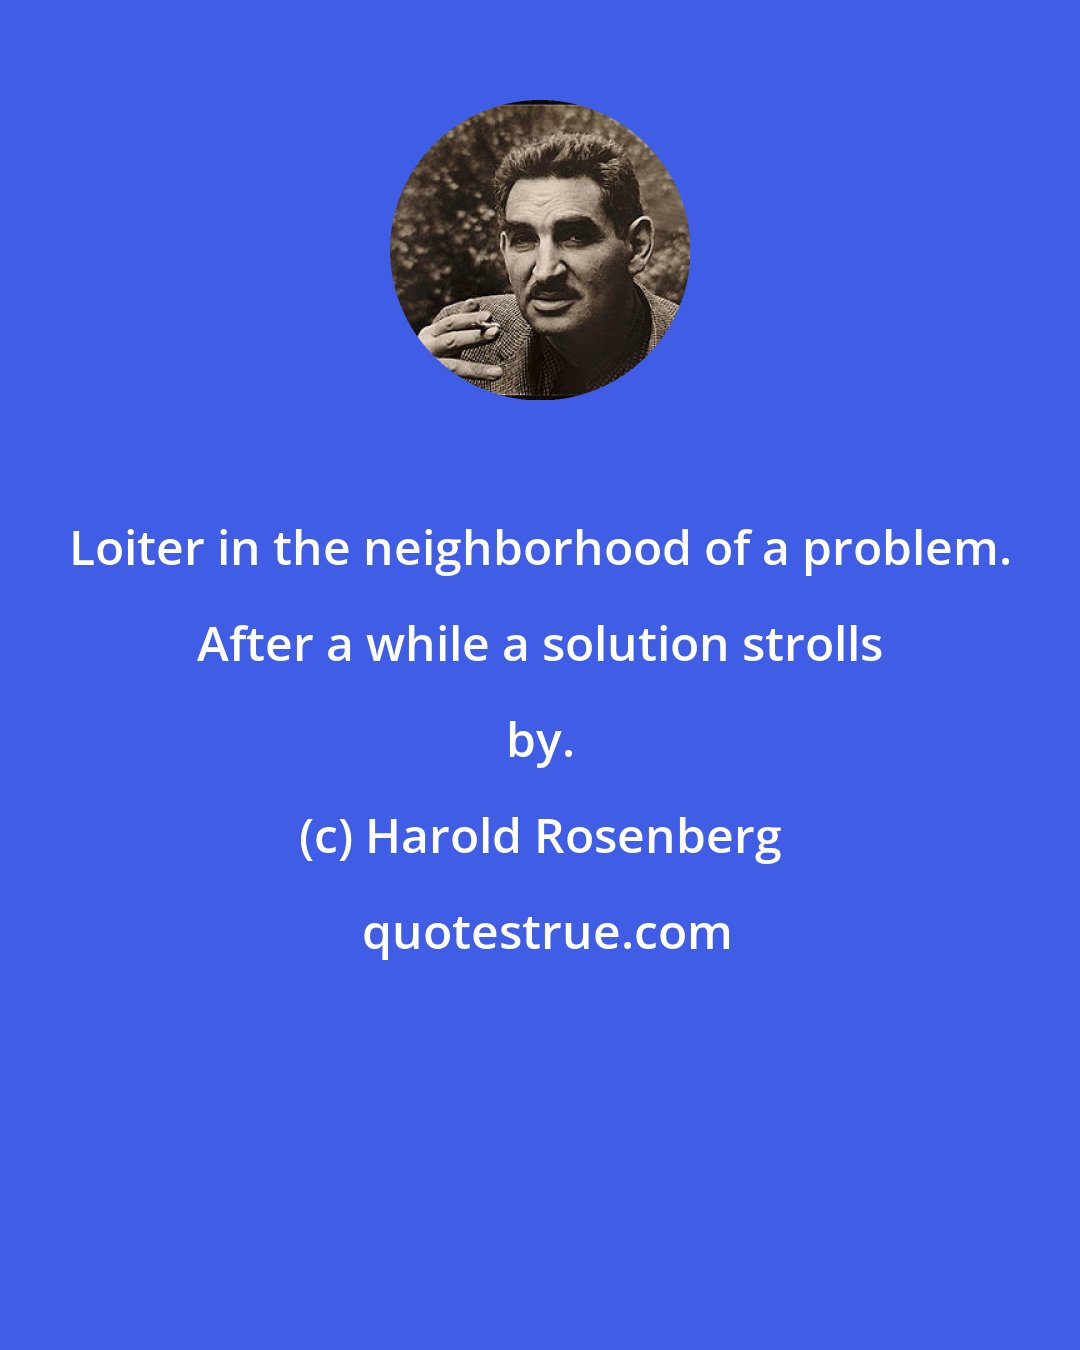 Harold Rosenberg: Loiter in the neighborhood of a problem. After a while a solution strolls by.